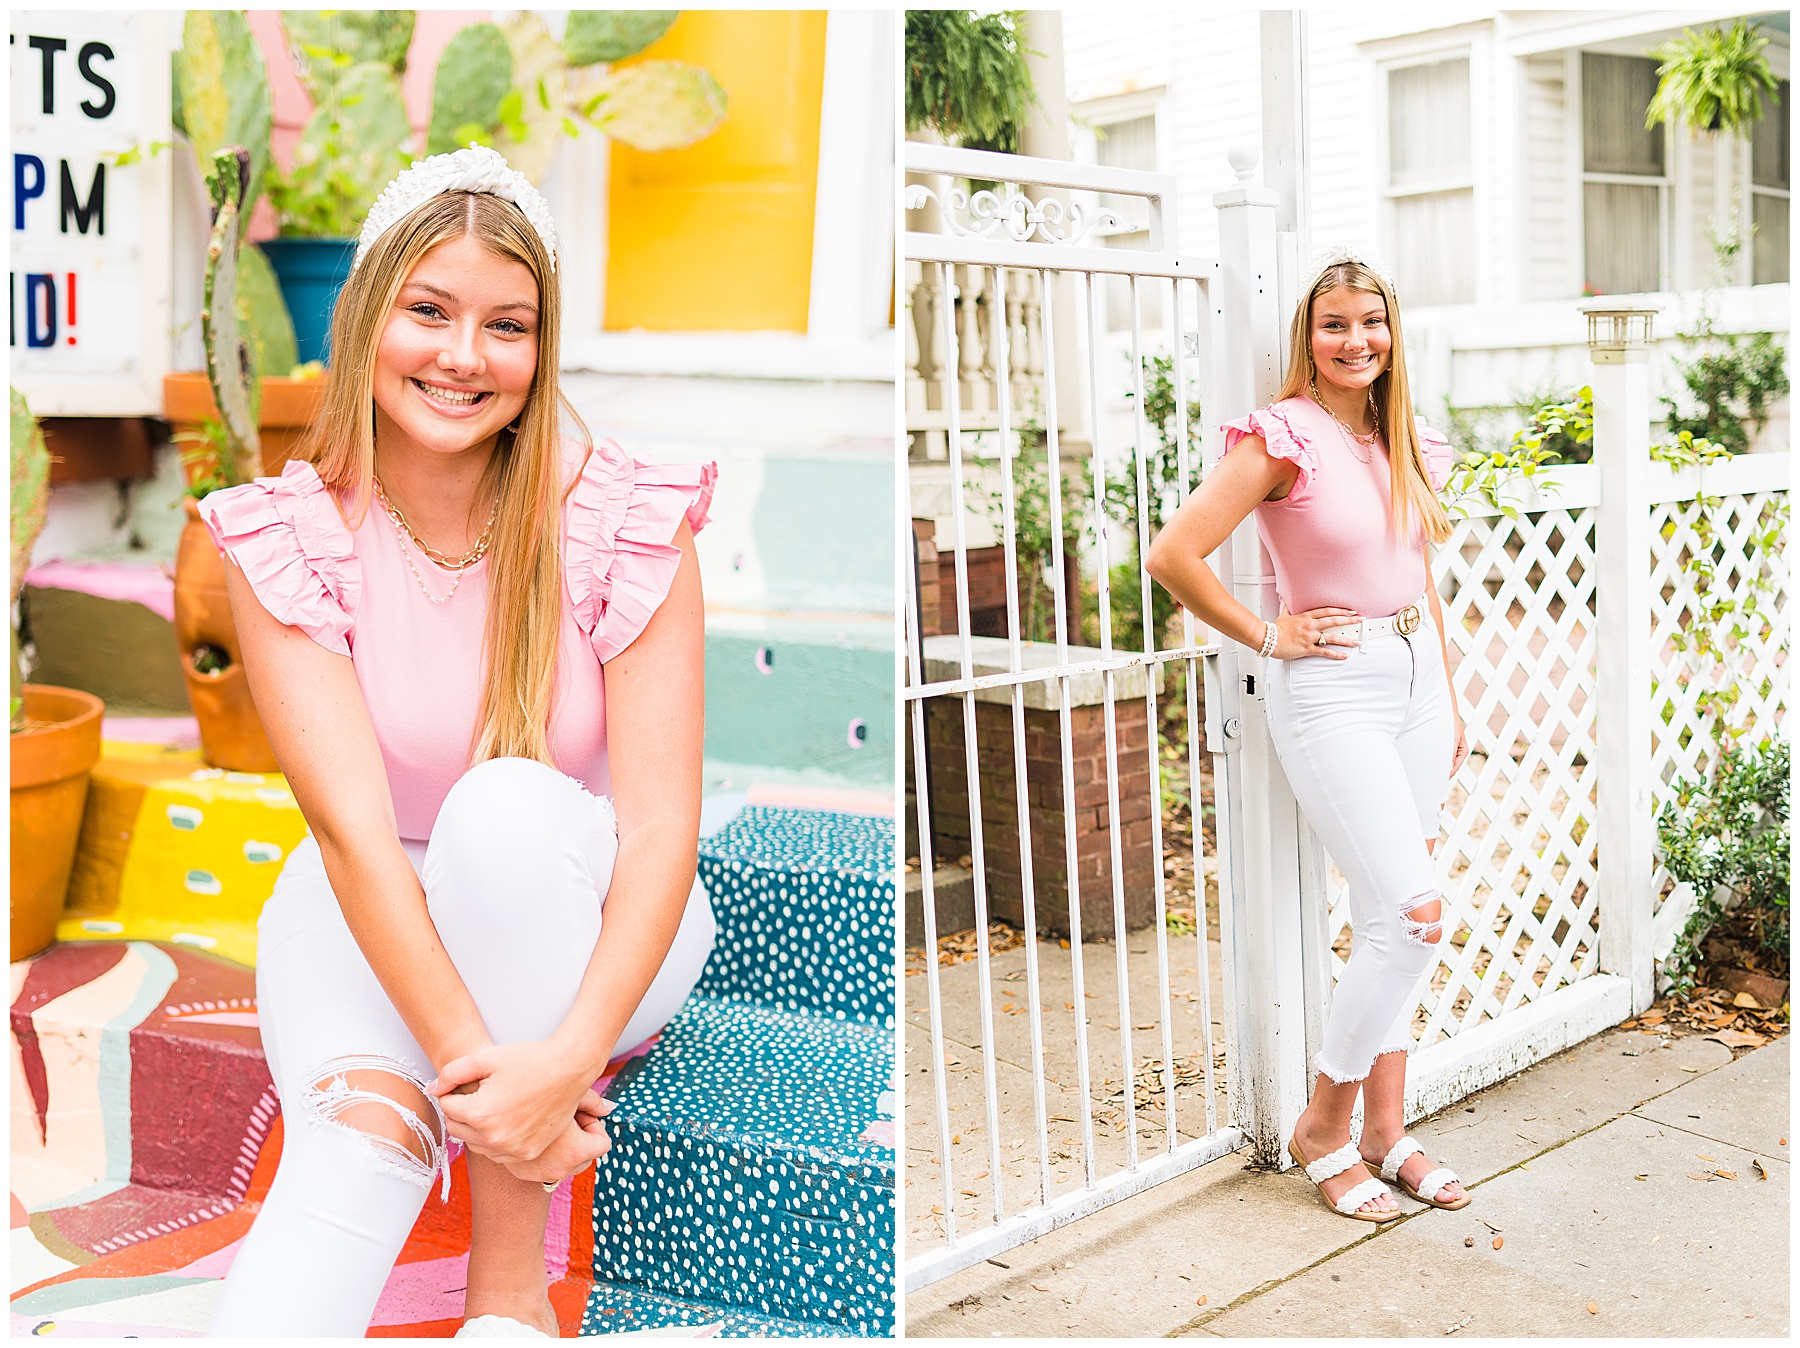 high school senior wearing a pink top and white pants smiling for photos in downtown savannah, Georgia